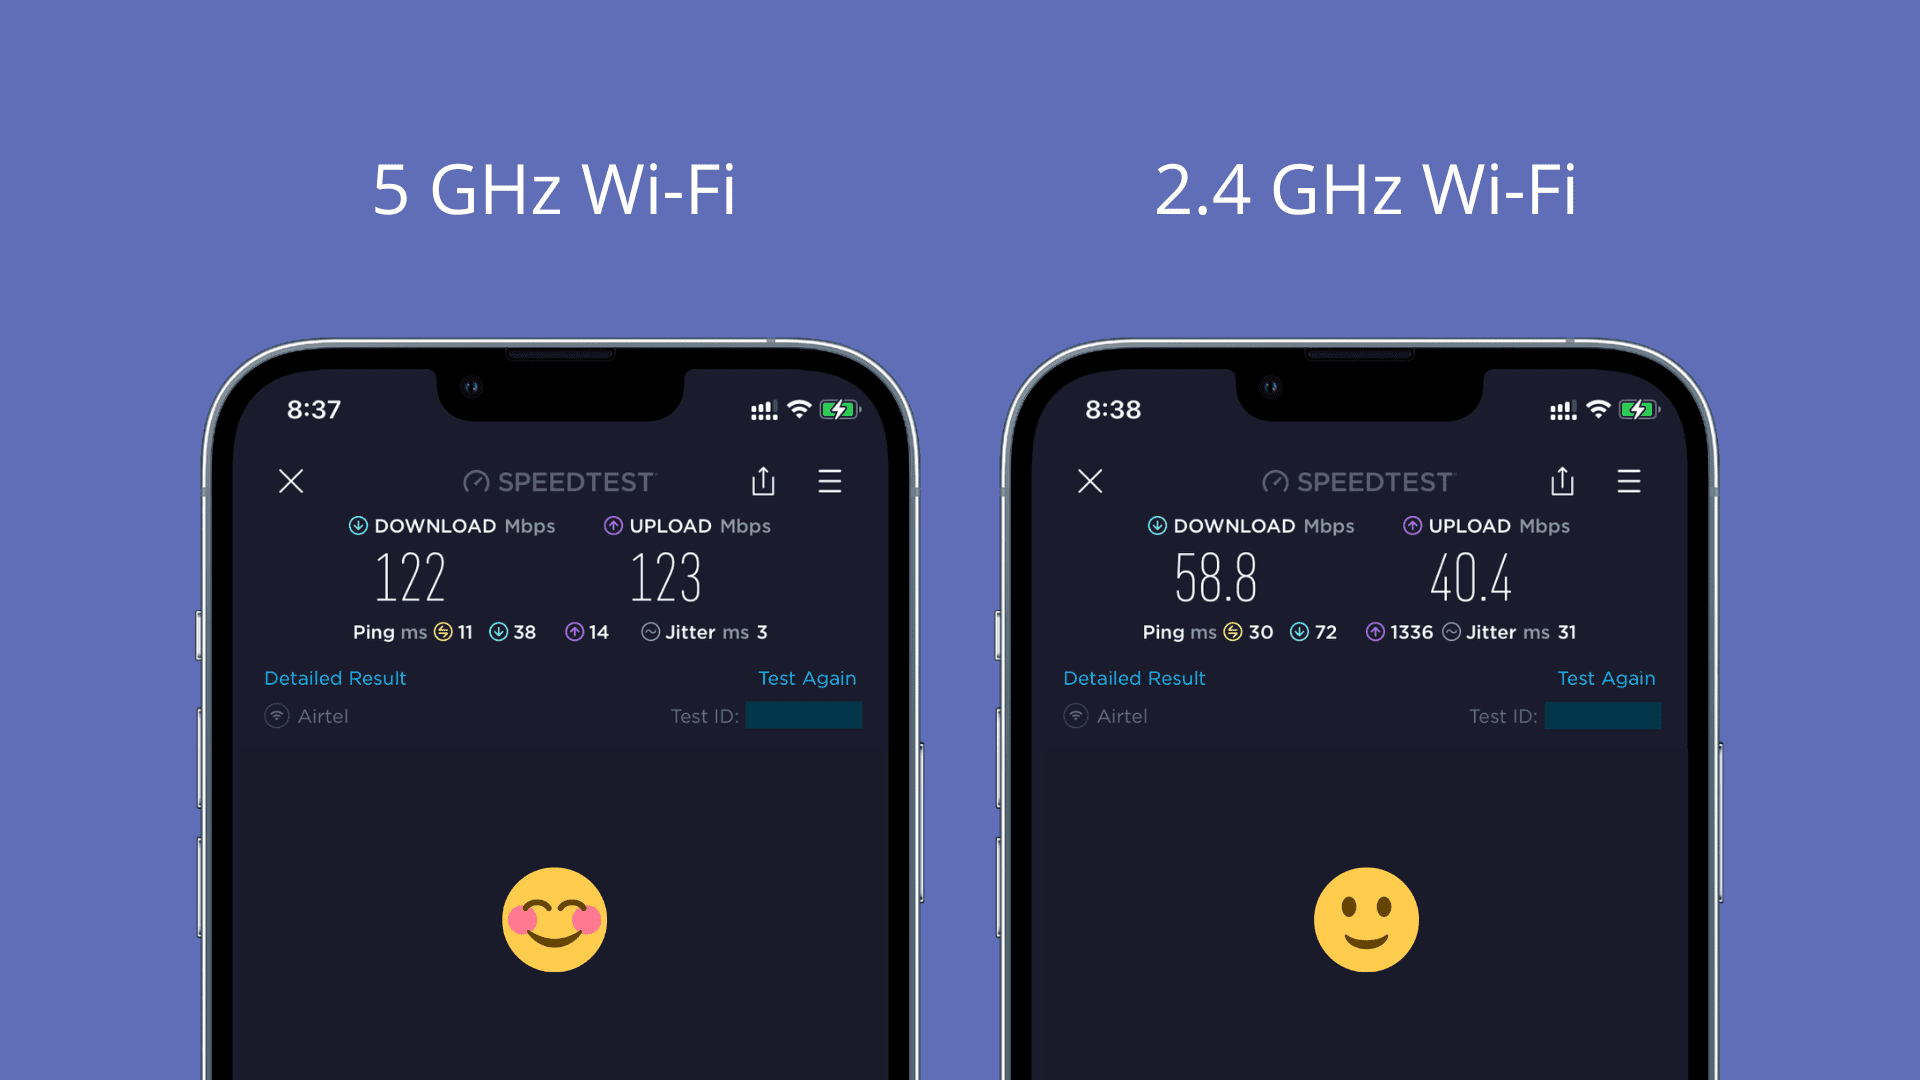 Wi-Fi speed comparison between 5 GHz vs 2.4 GHz bands